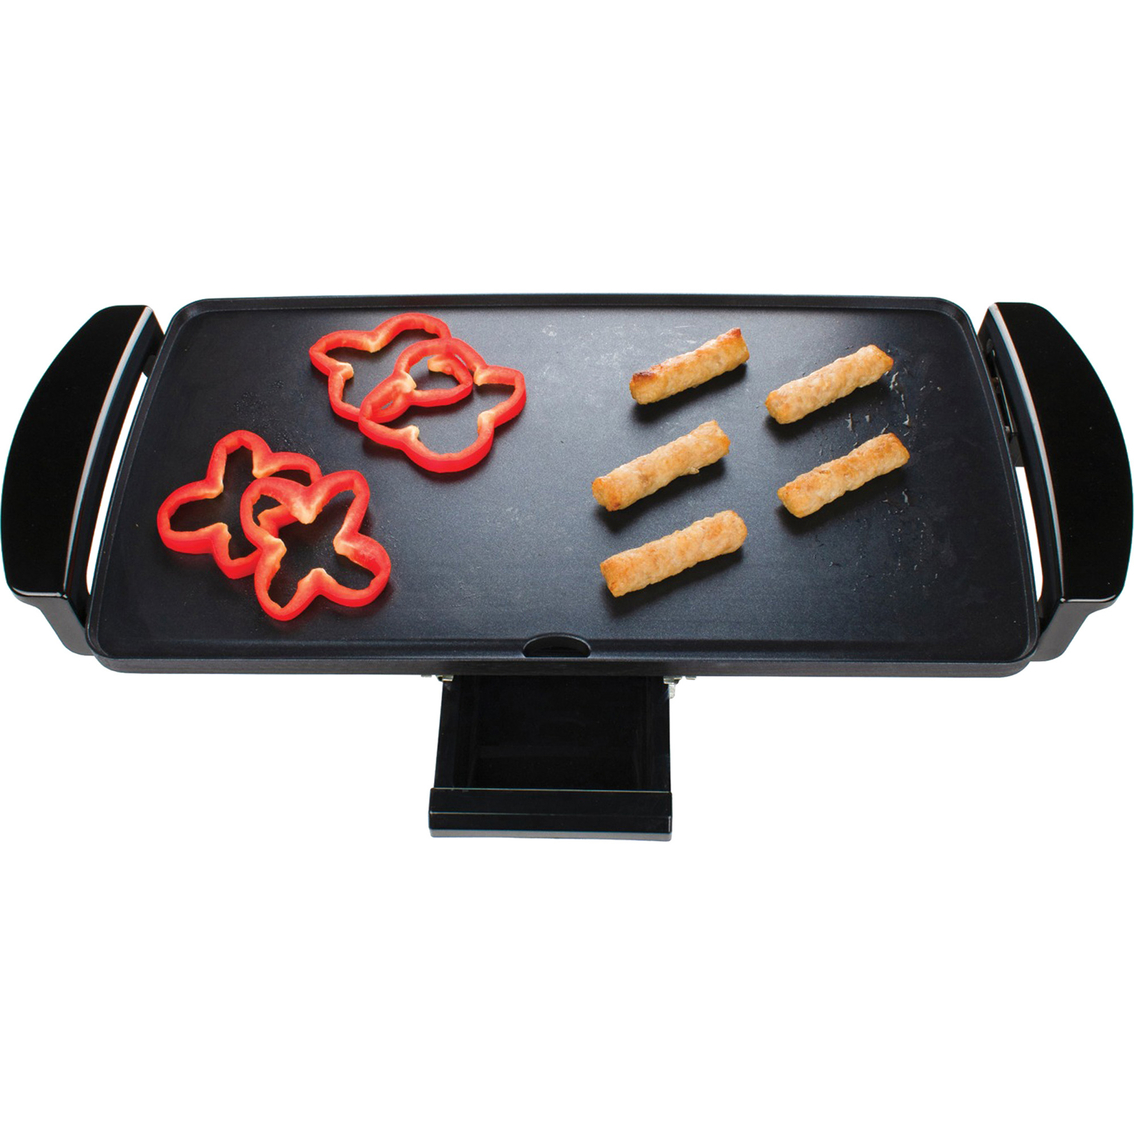 Brentwood Nonstick Electric Griddle with Drip Pan - Image 5 of 6